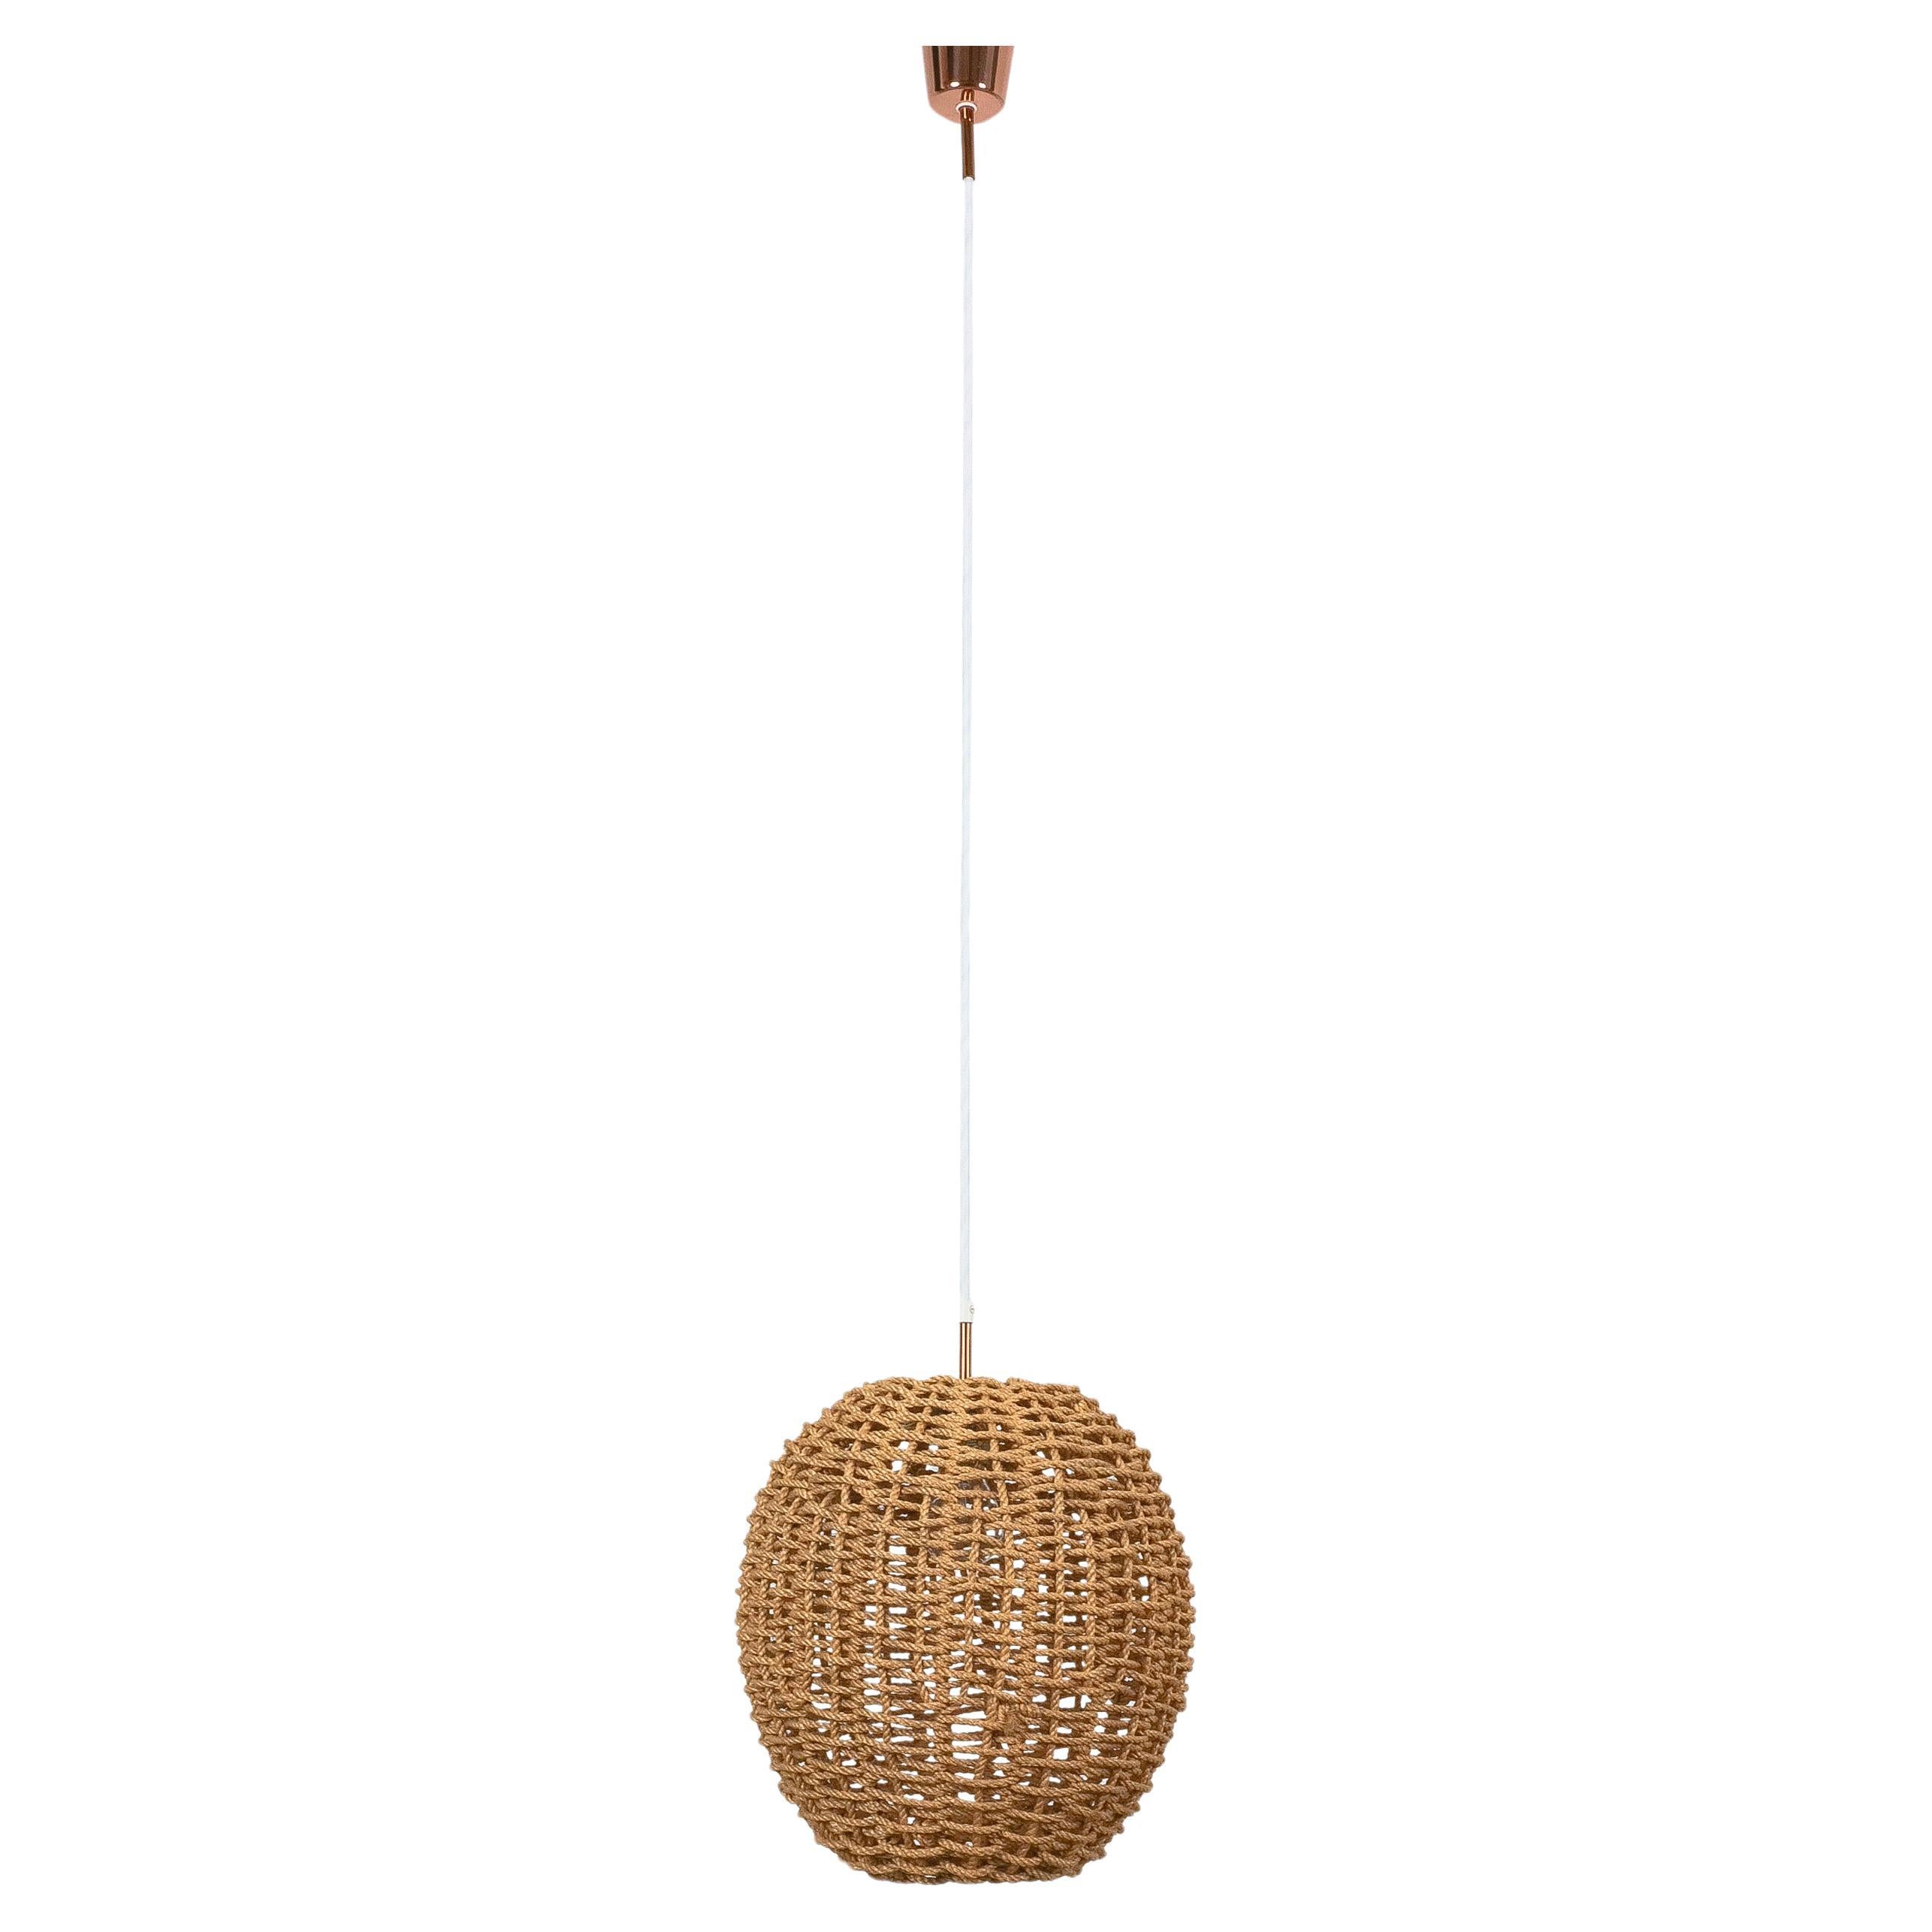 Audoux Minet Pendant Lamp Made from Rope and Brass, France, 1950 For Sale 6